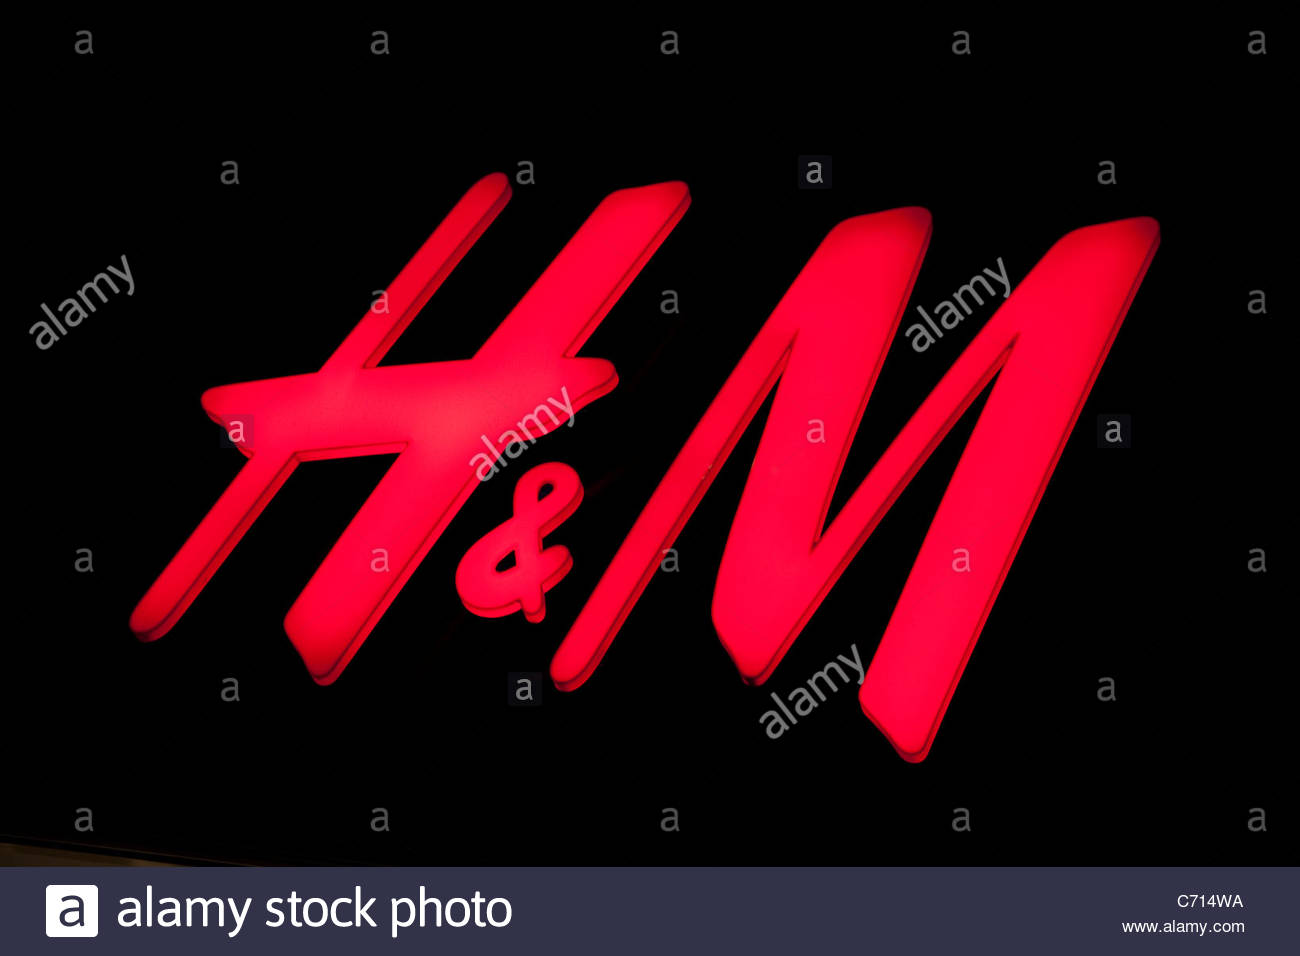 We Finally Know What H&M Stands For